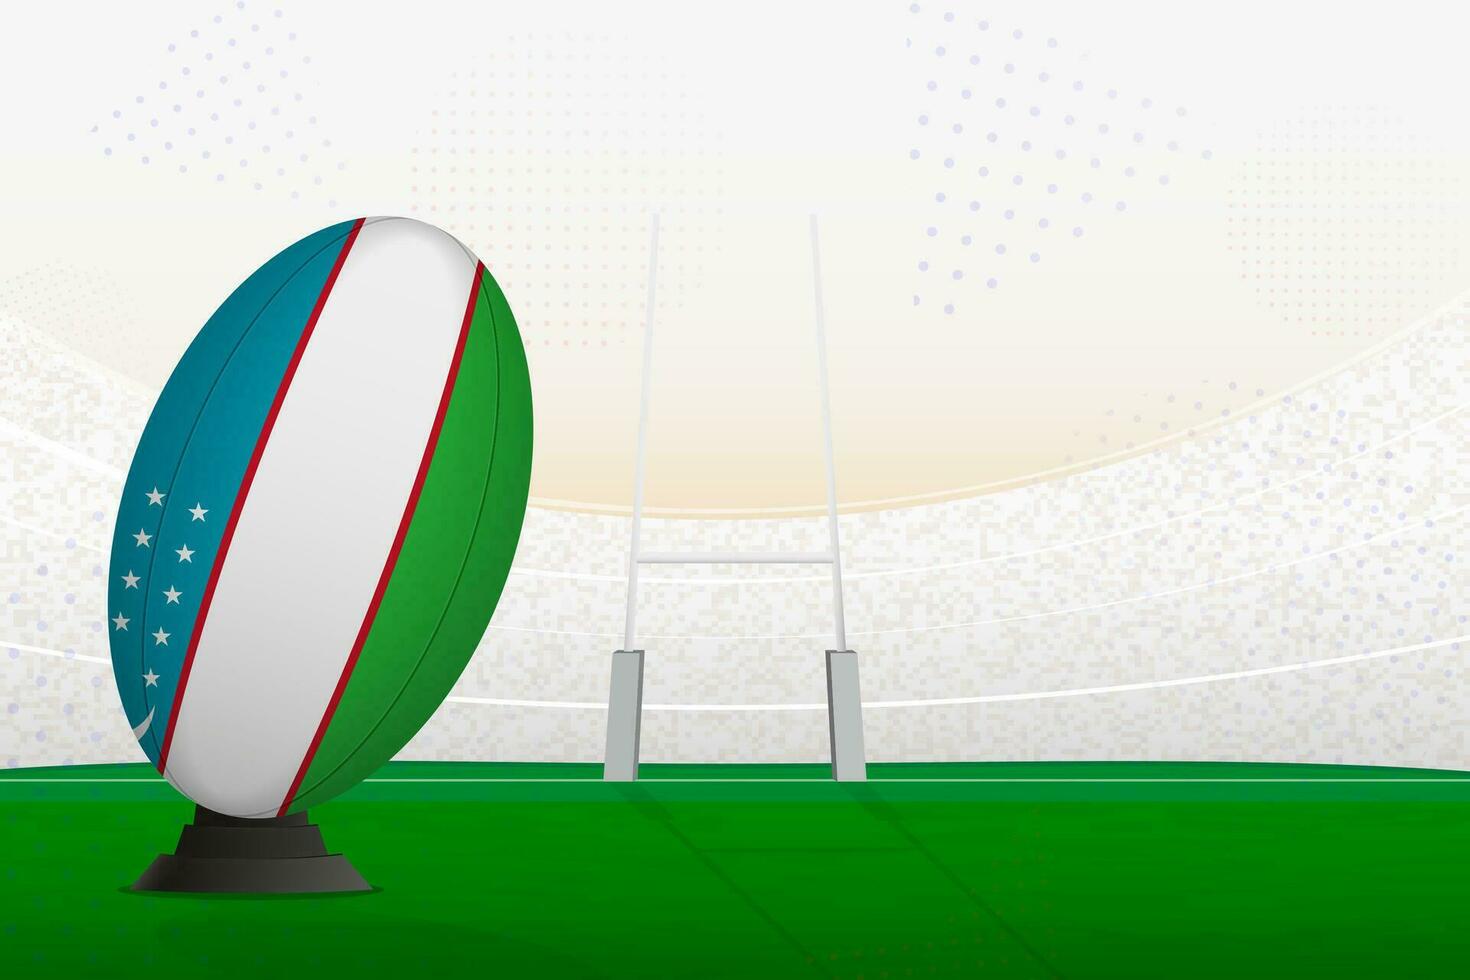 Uzbekistan national team rugby ball on rugby stadium and goal posts, preparing for a penalty or free kick. vector